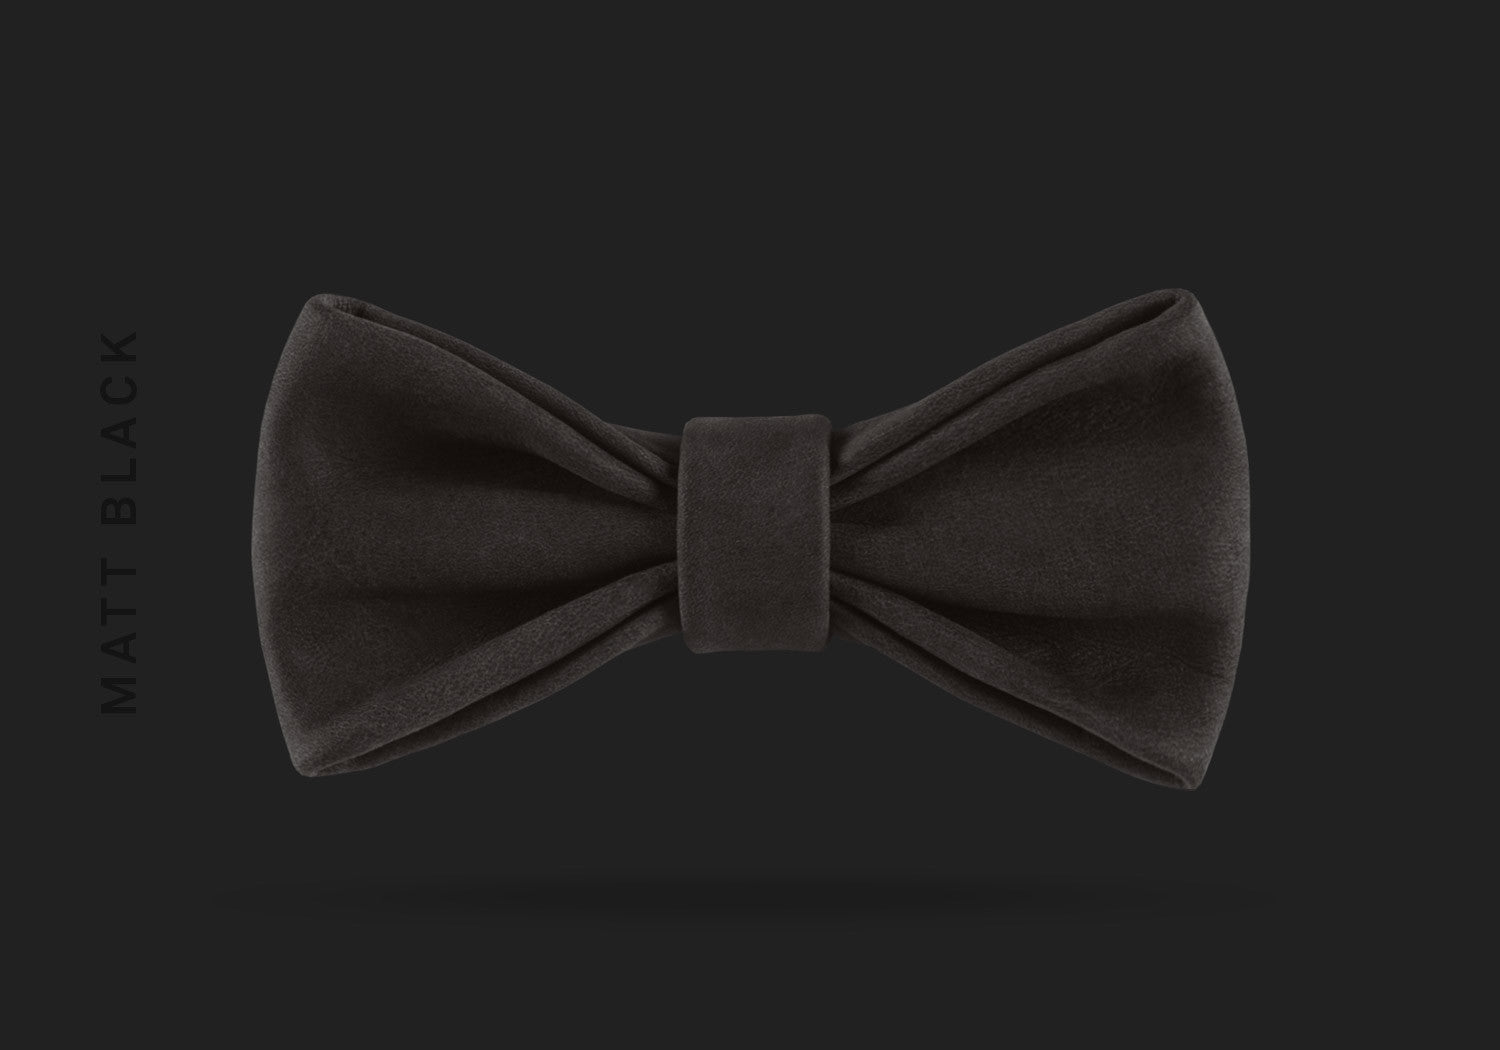 This matt black WEEF handmade leather bow is a great present or gift idea for dapper and stylish gentlemen for fathers day, valentines day or Christmas.